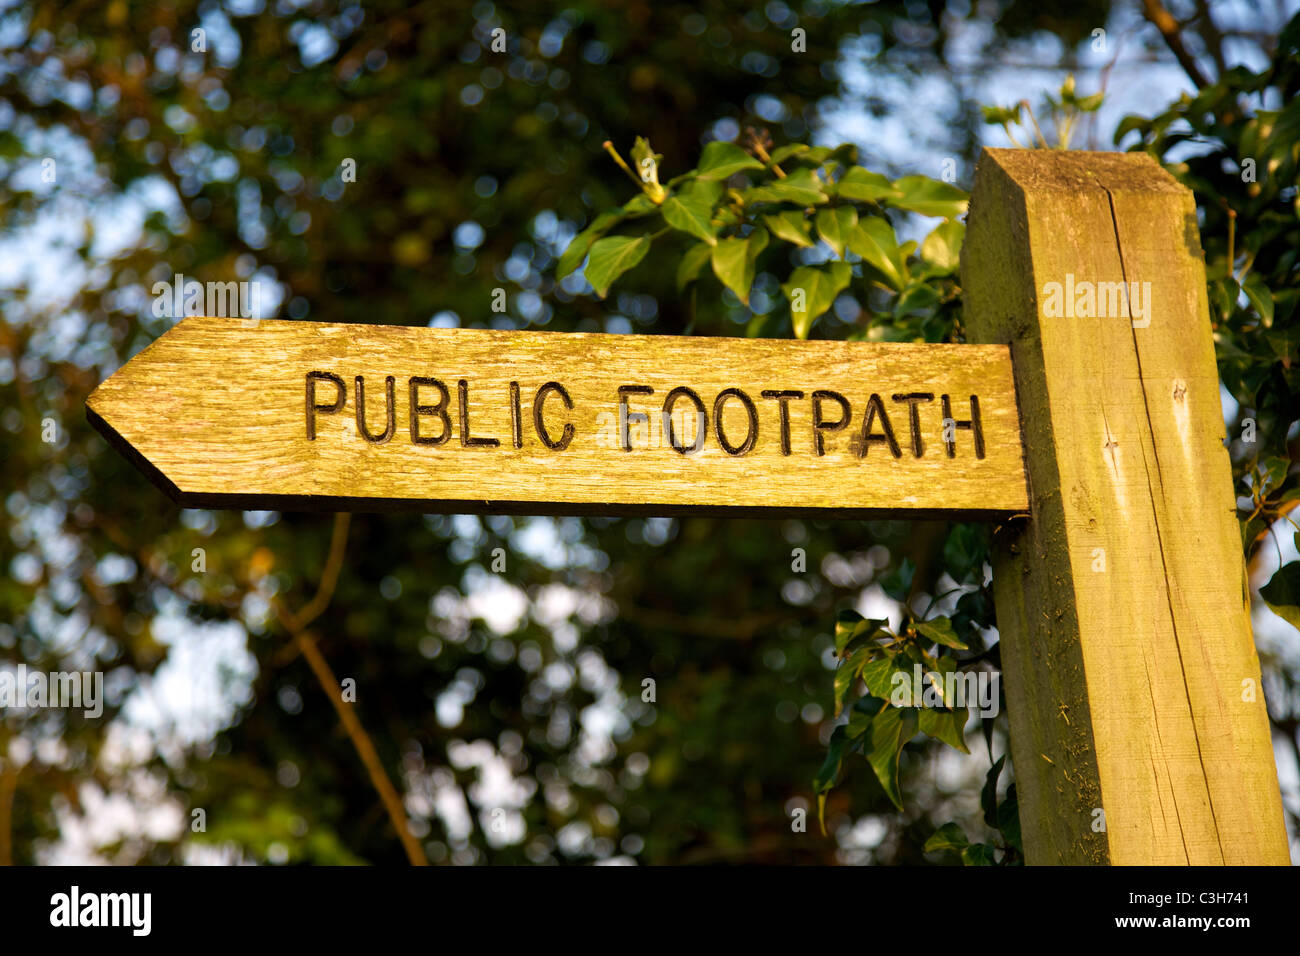 Public Footpath Sign in the shape of a Wooden arrow Stock Photo